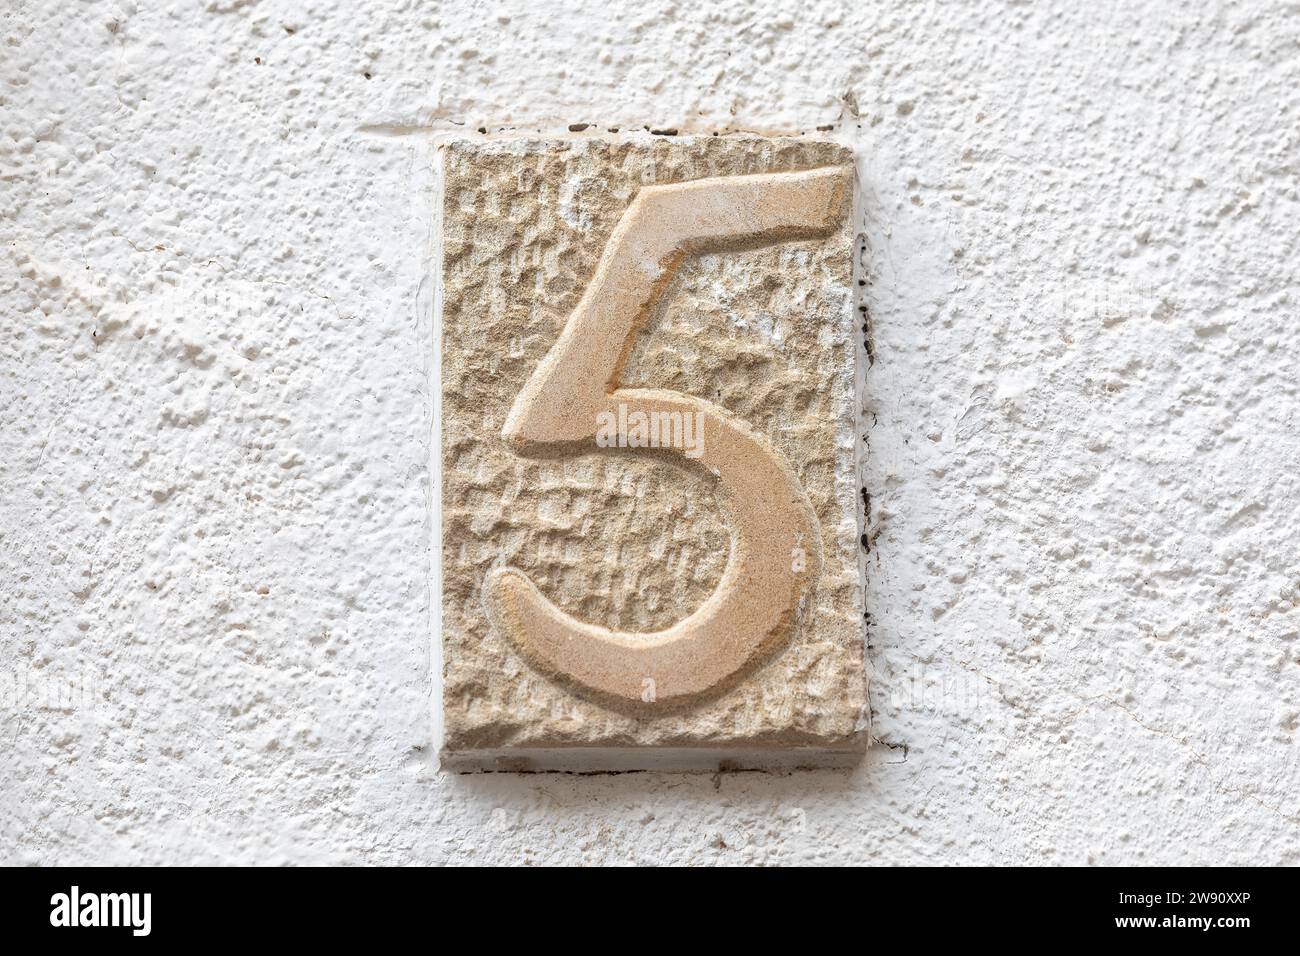 Old Weathered House Number 5, Tile on Wall Stock Photo